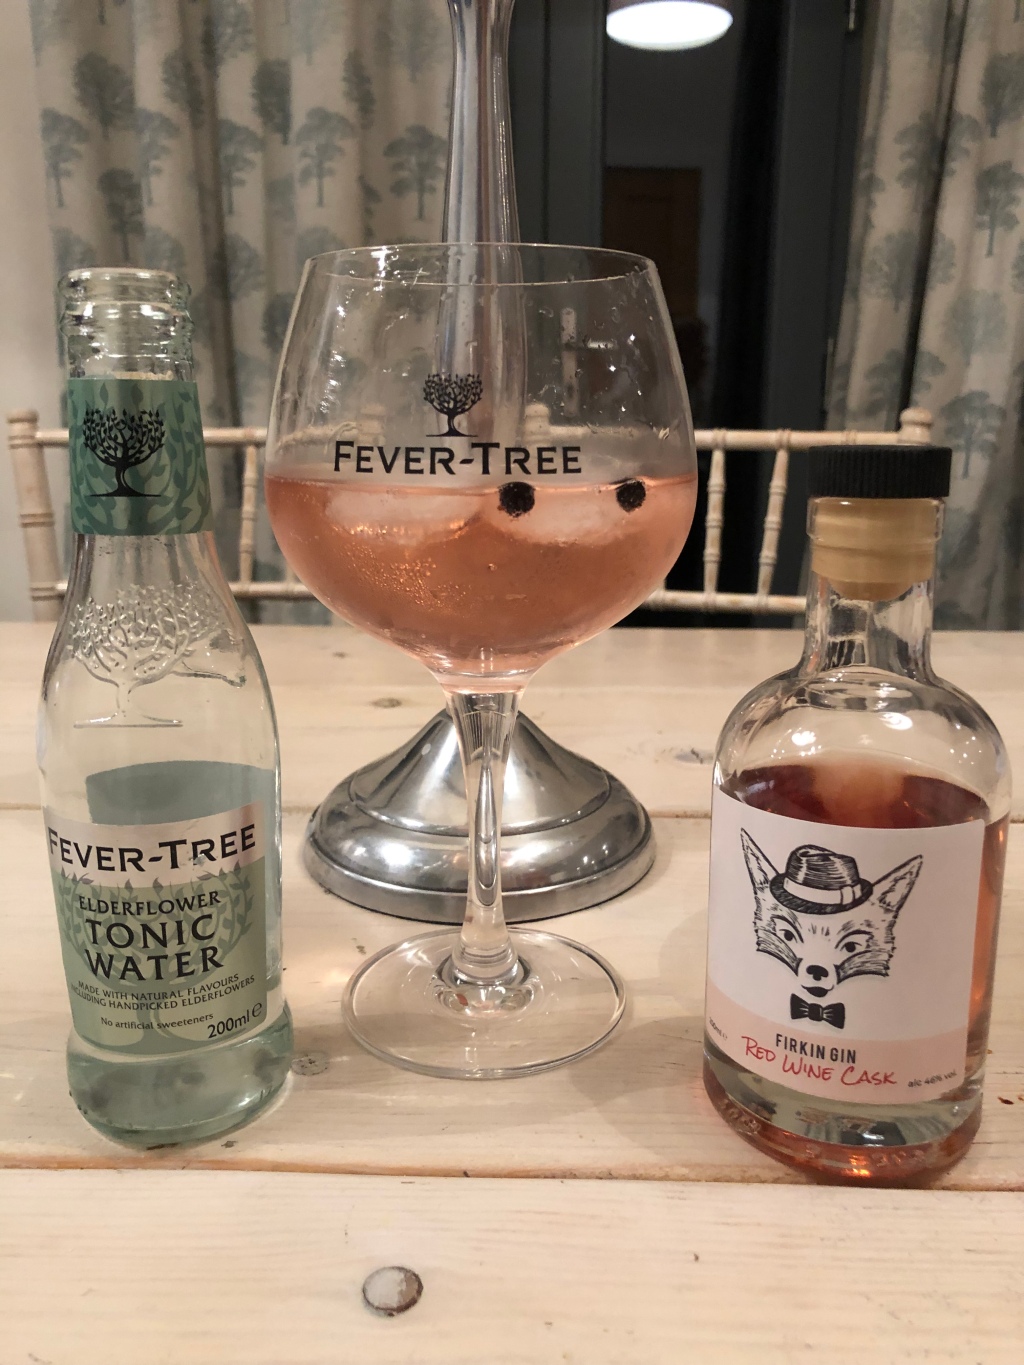 Gin of the Month – Firkin Red Wine Cask Gin